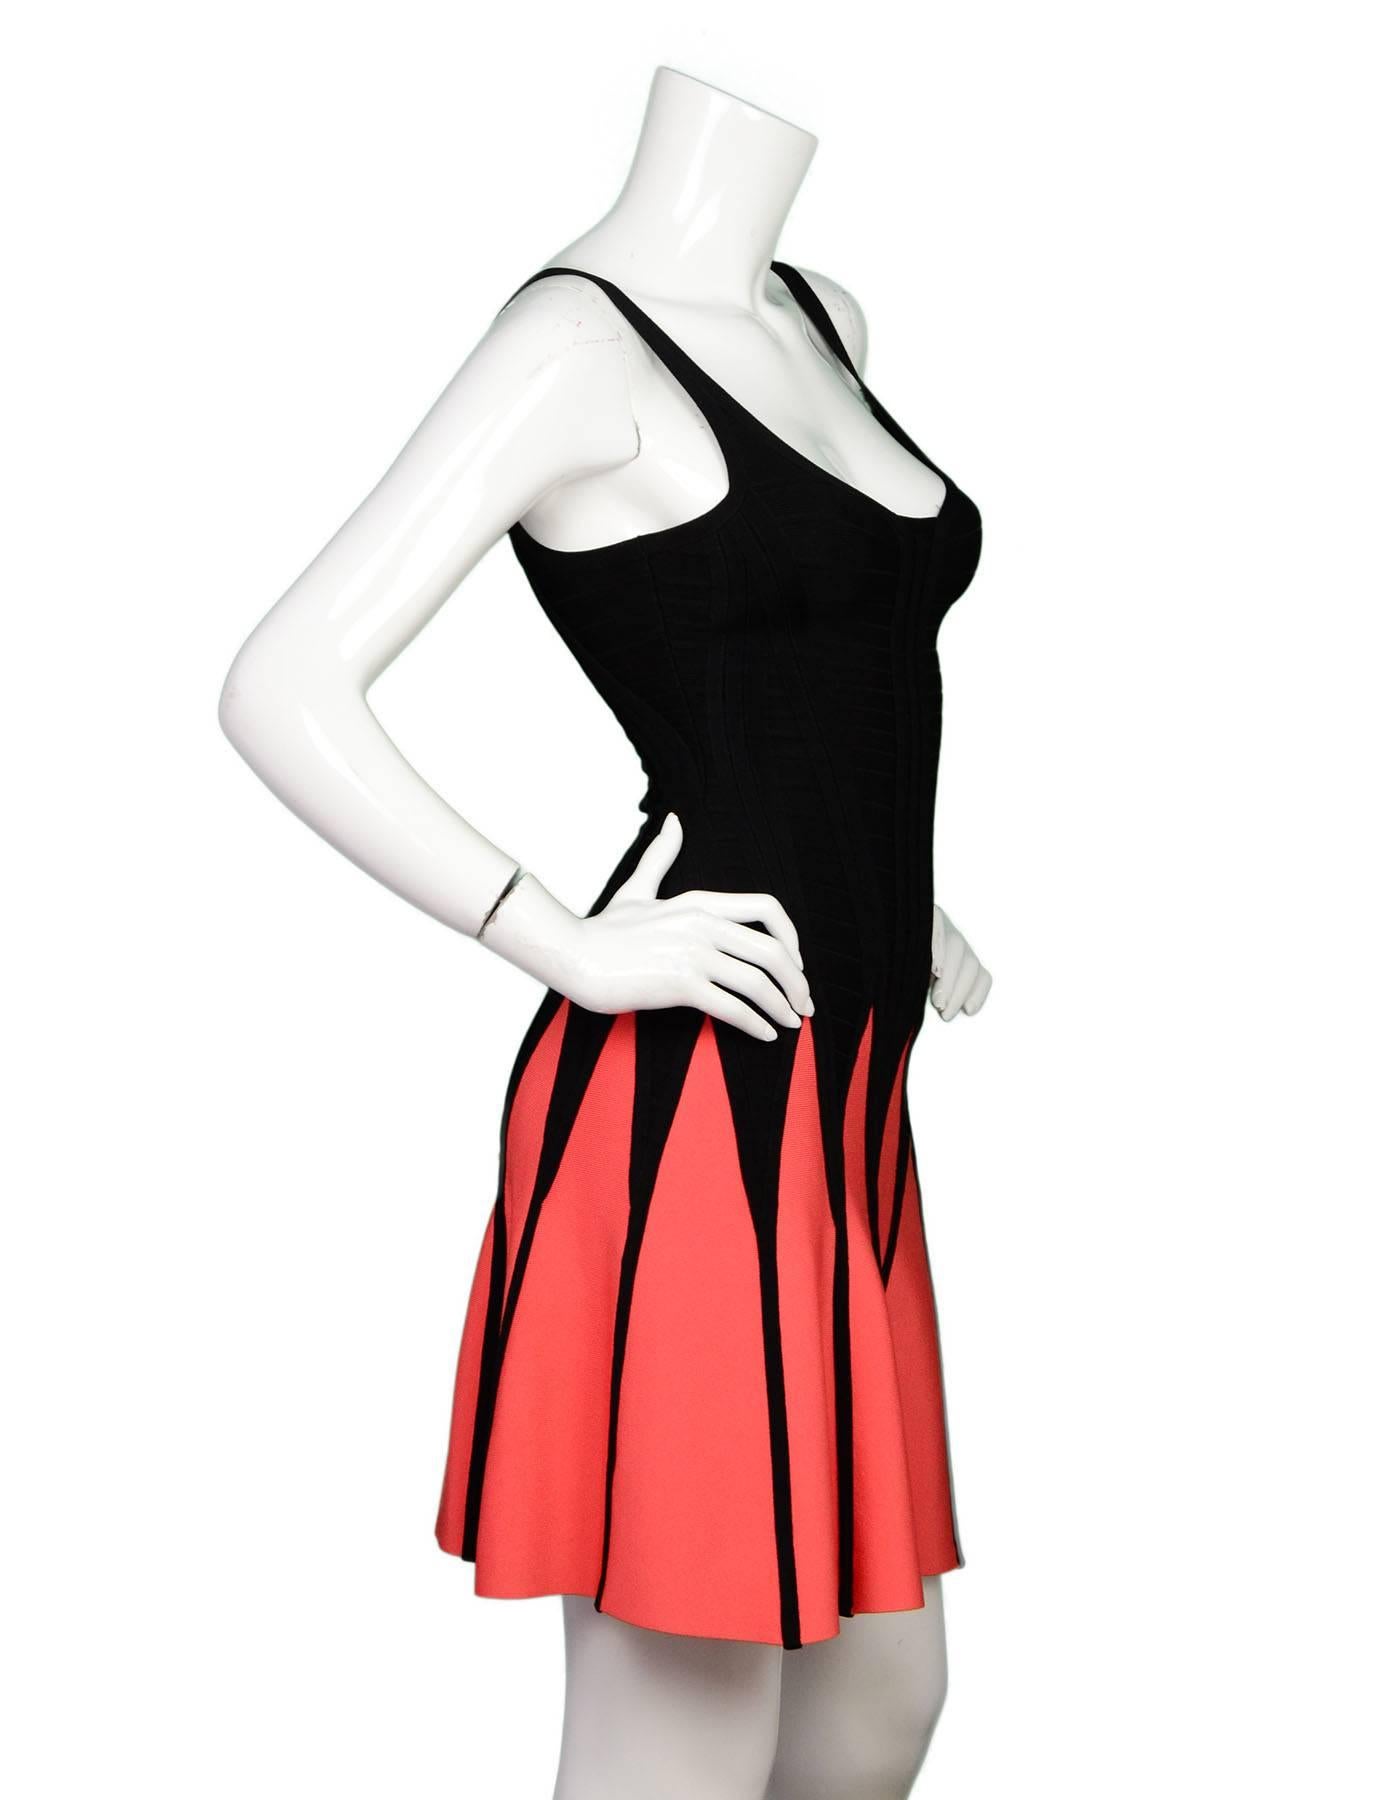 Herve Leger Black & Coral Fit-Flare Bandage Dress 
Made In: China
Color: Black and coral/orange
Composition: 90% rayon, 9% nylon, 1% spandex
Lining: None
Closure/Opening: Back center zip up
Exterior Pockets: None
Interior Pockets: